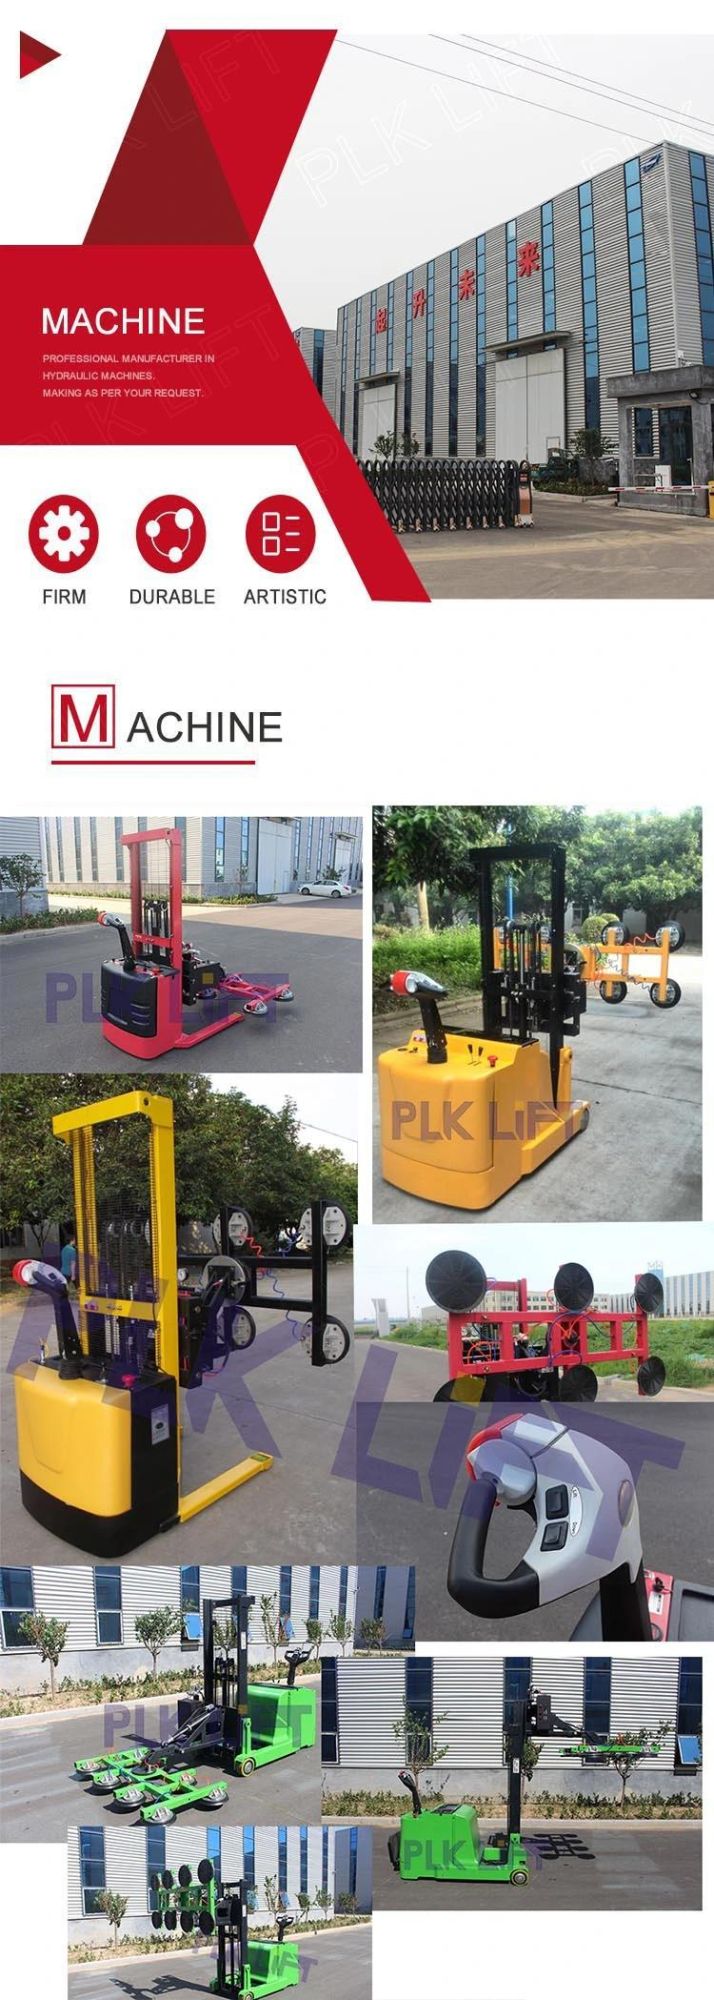 High End Handing Tool Electric Glass Vacuum Lifter for Europe